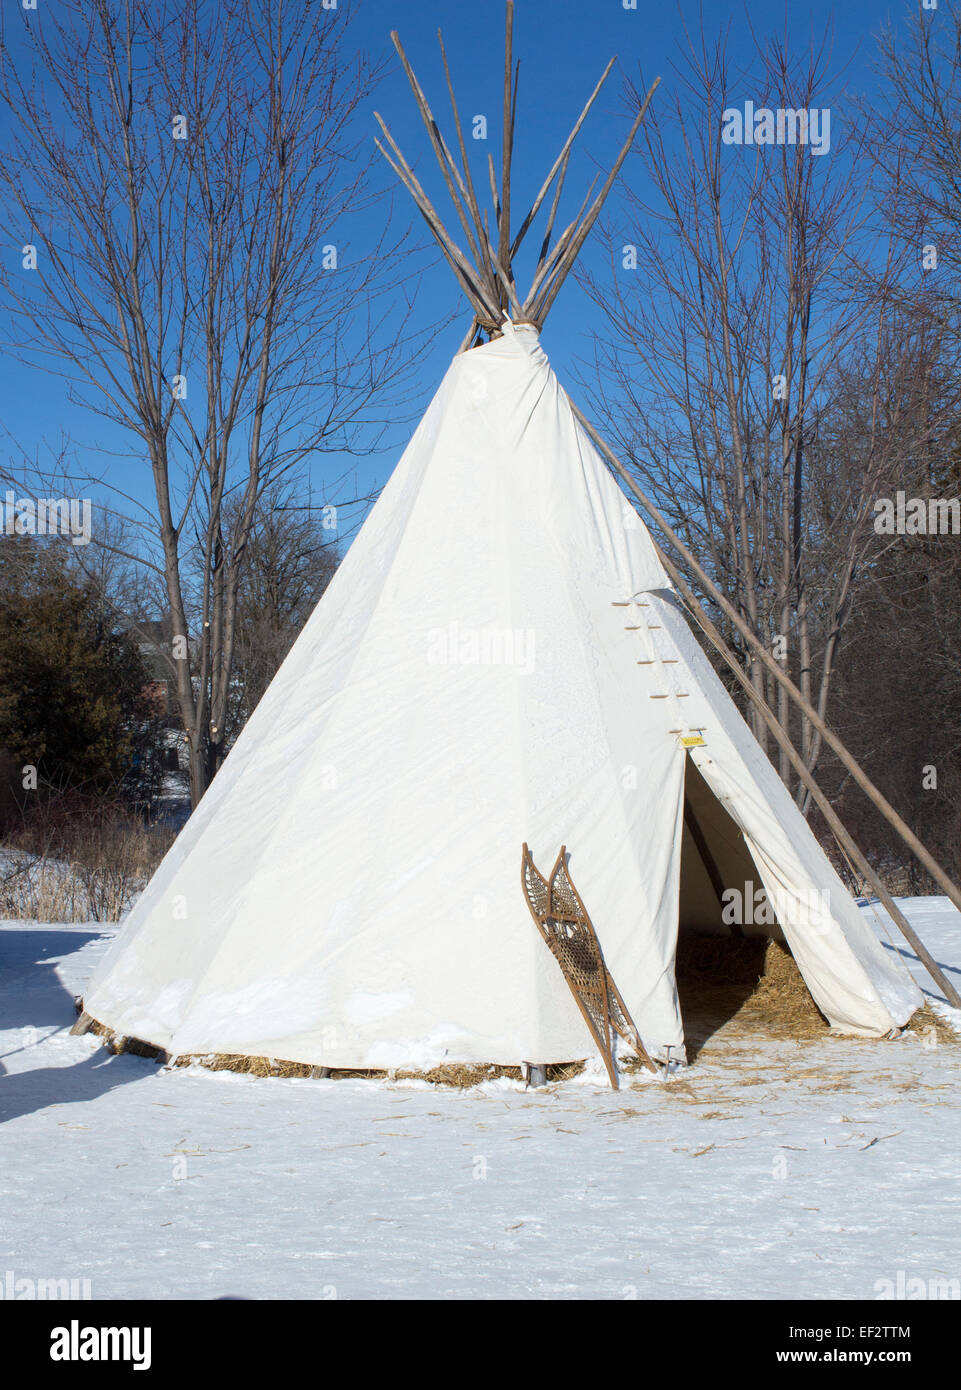 teepee-on-display-at-the-winter-festival